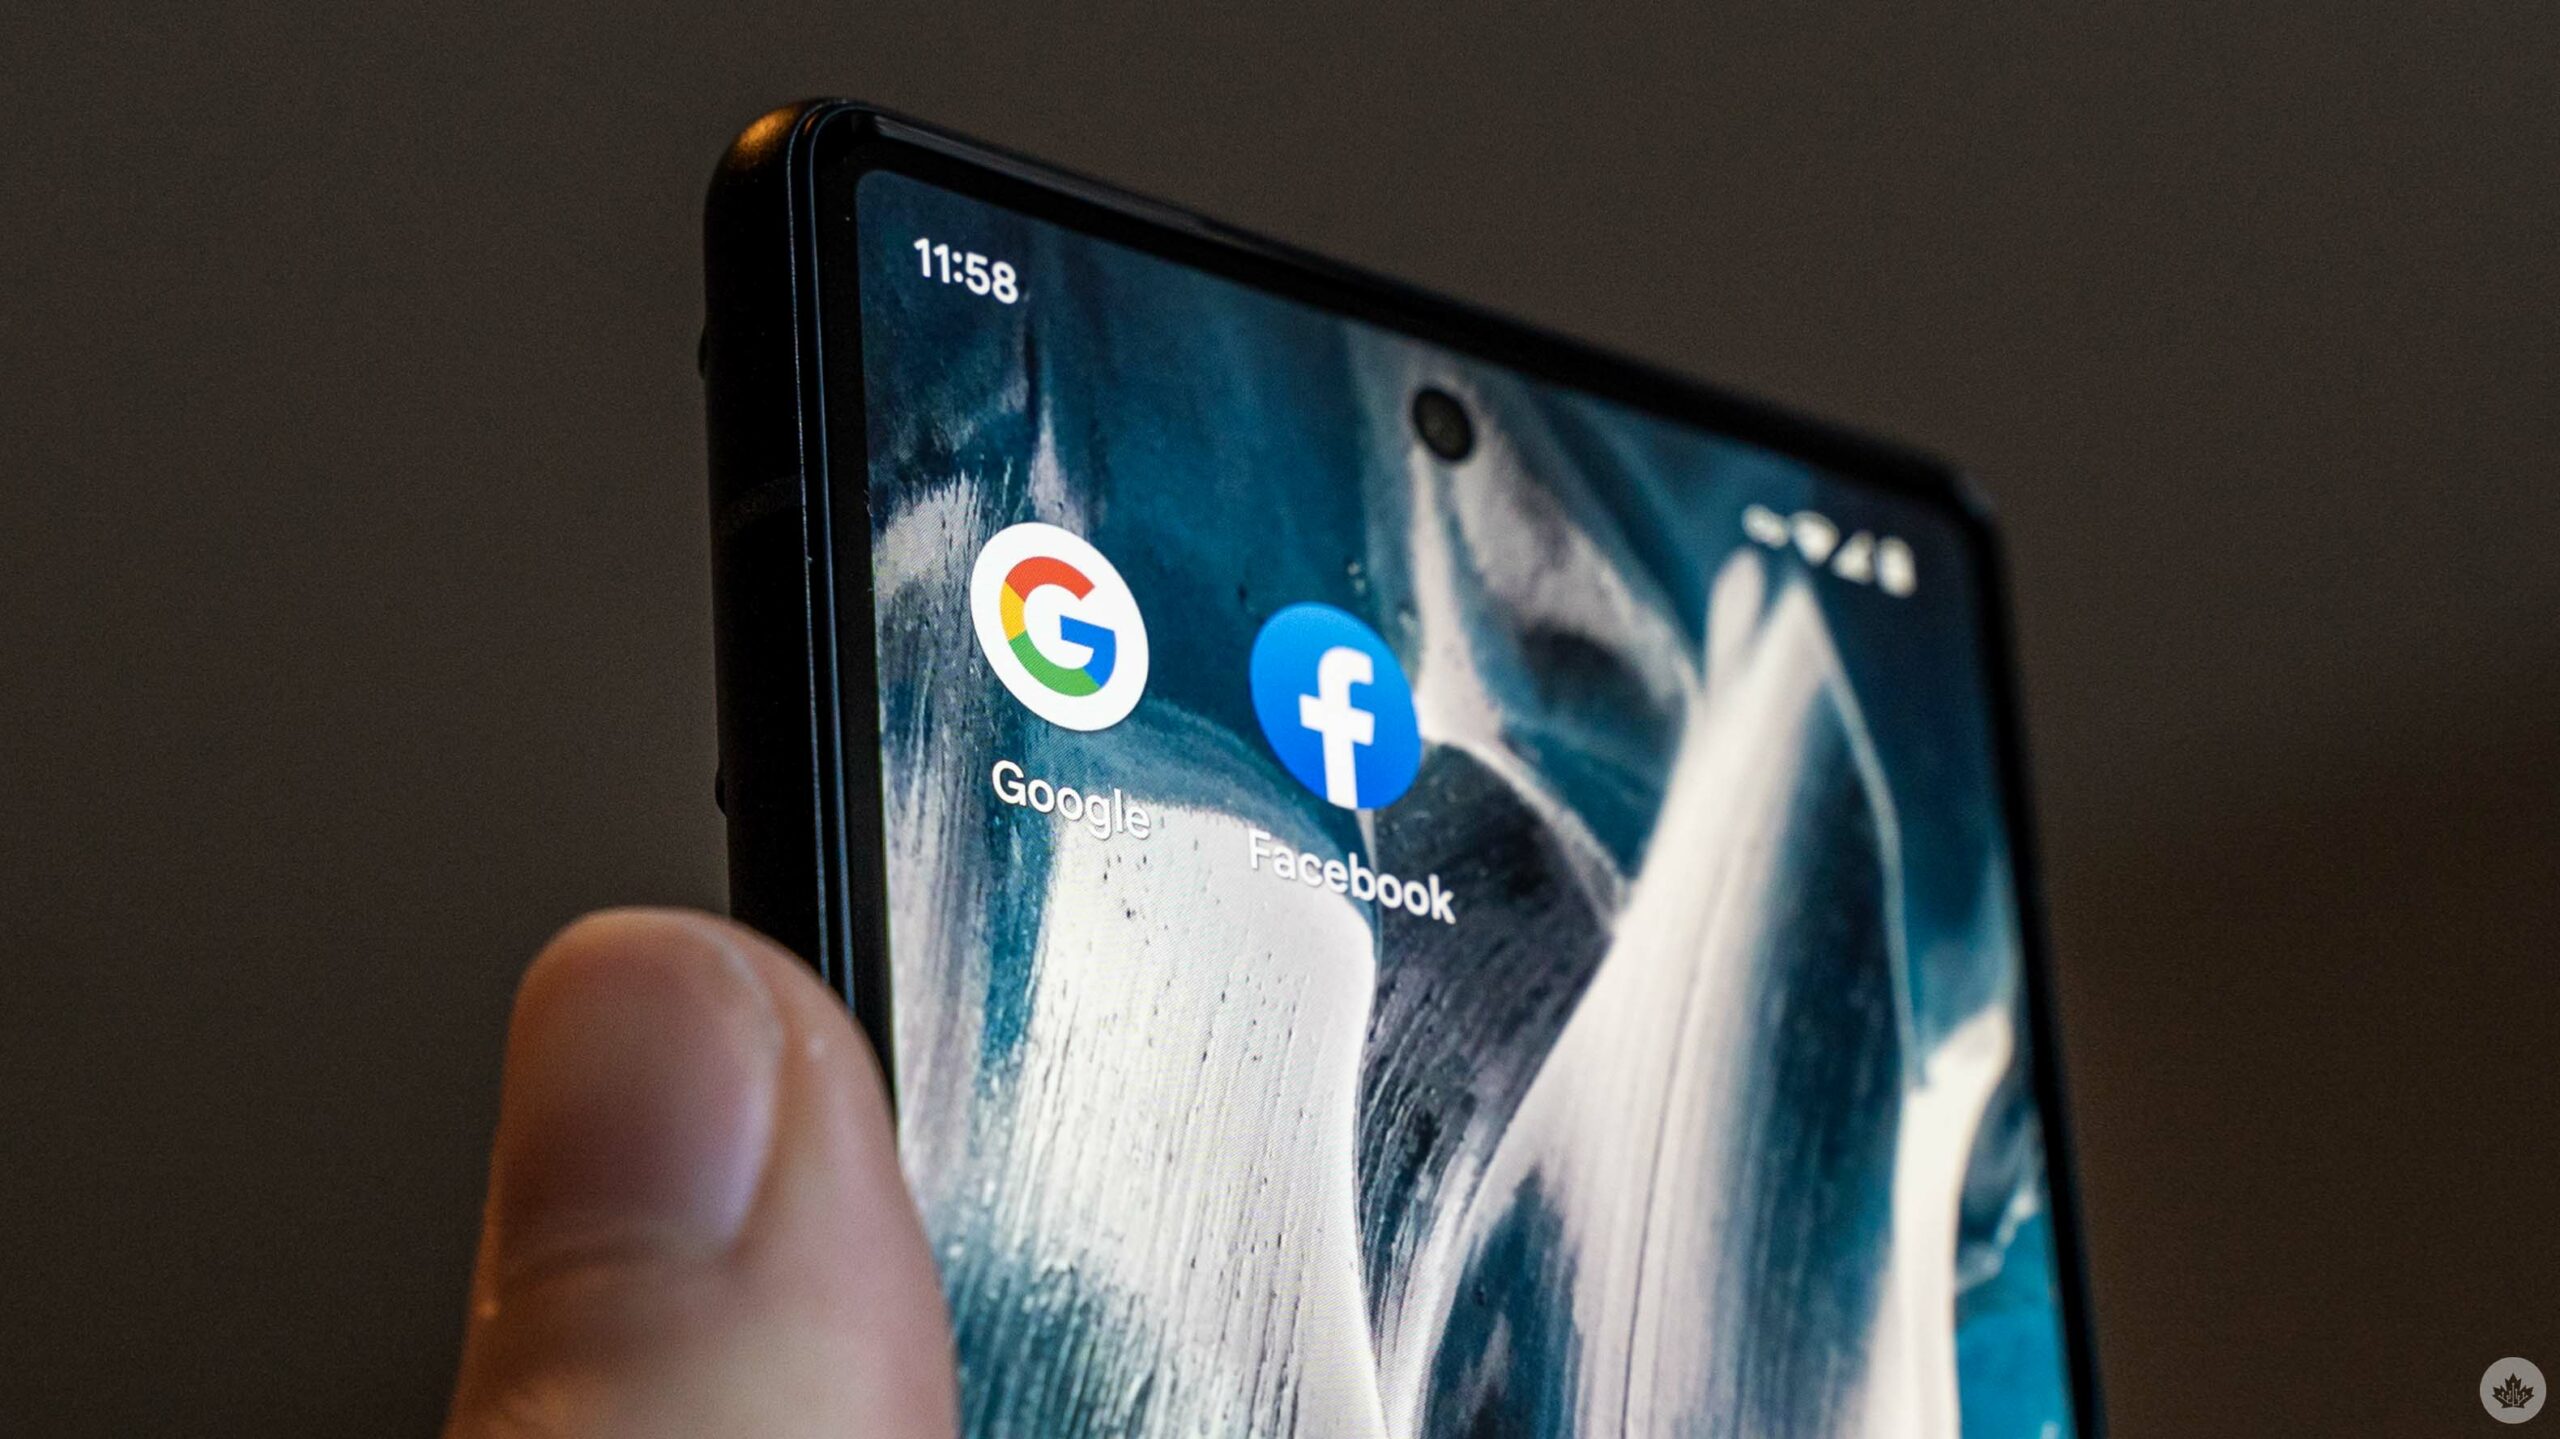 Google and Facebook apps on Android